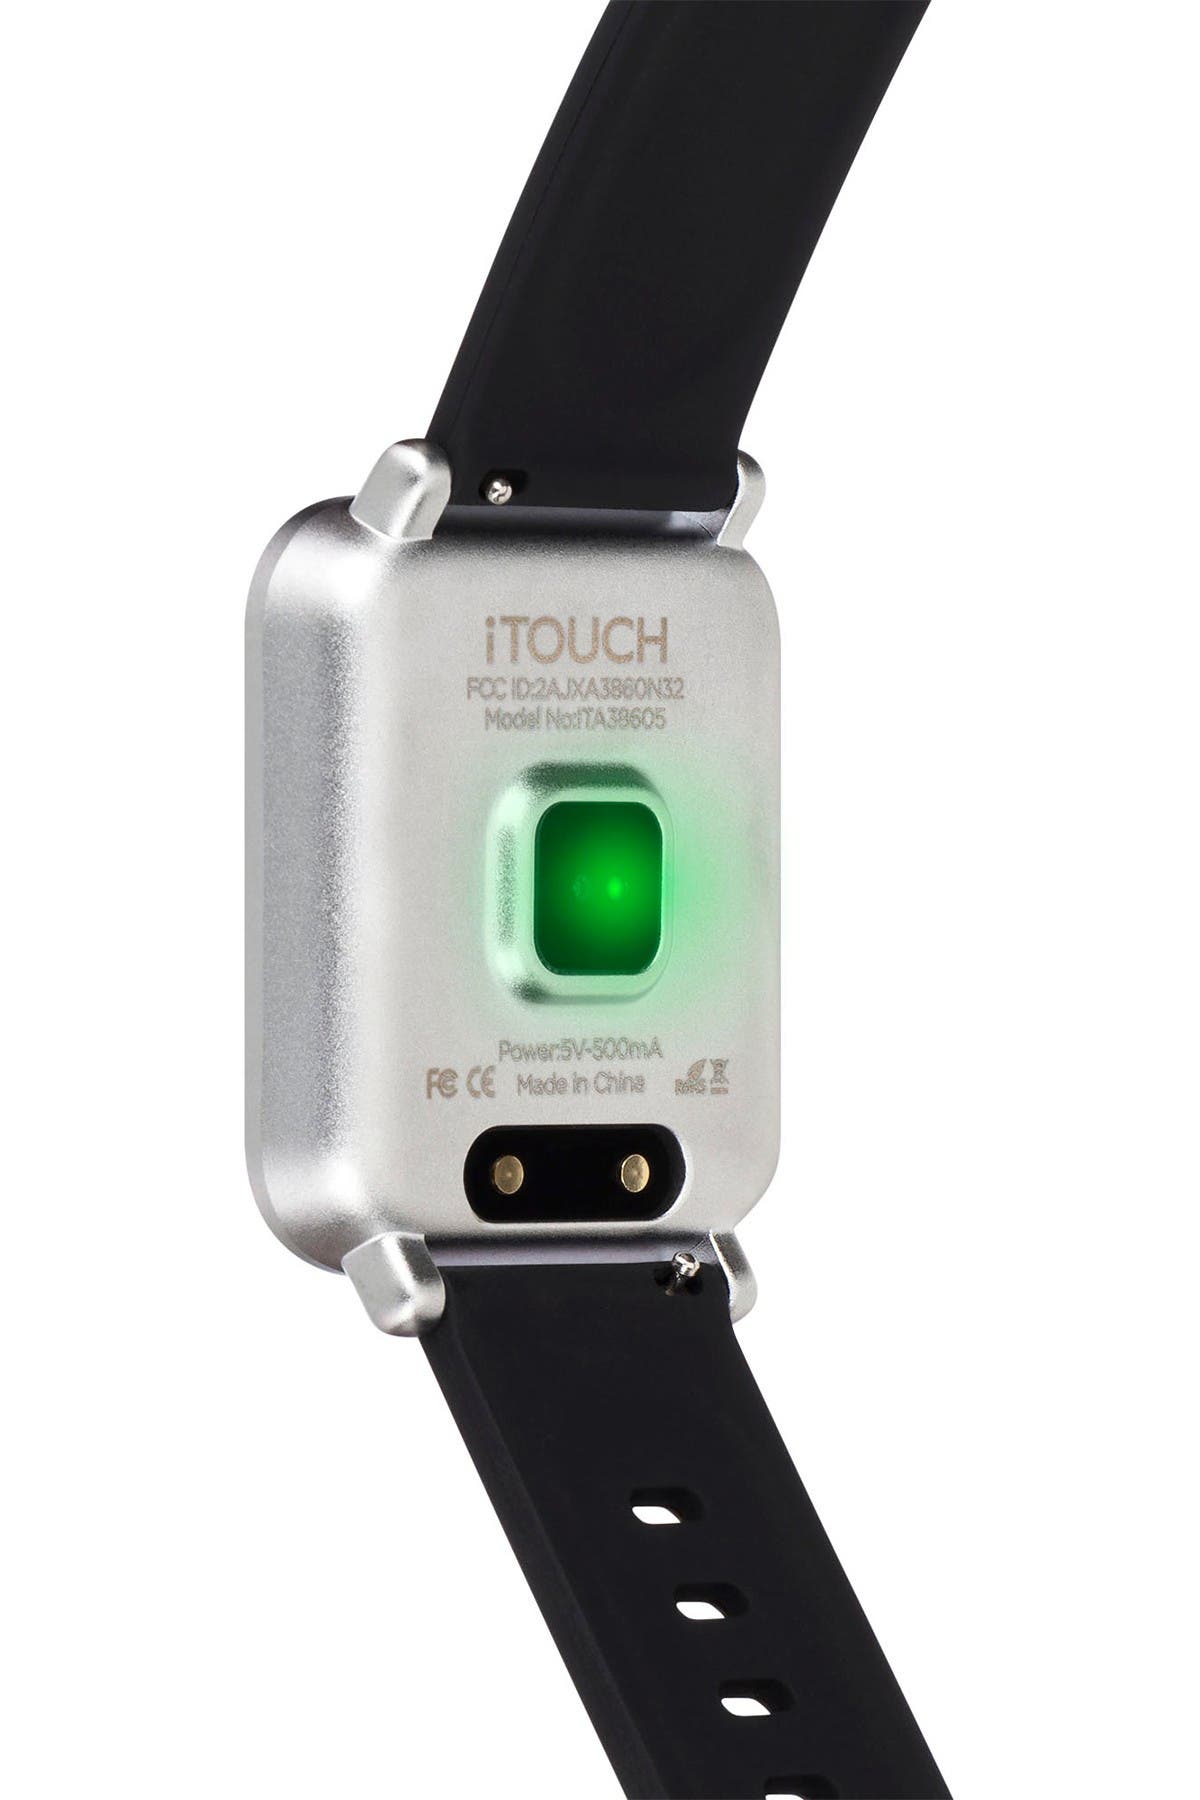 itouch air 2 smartwatch charger